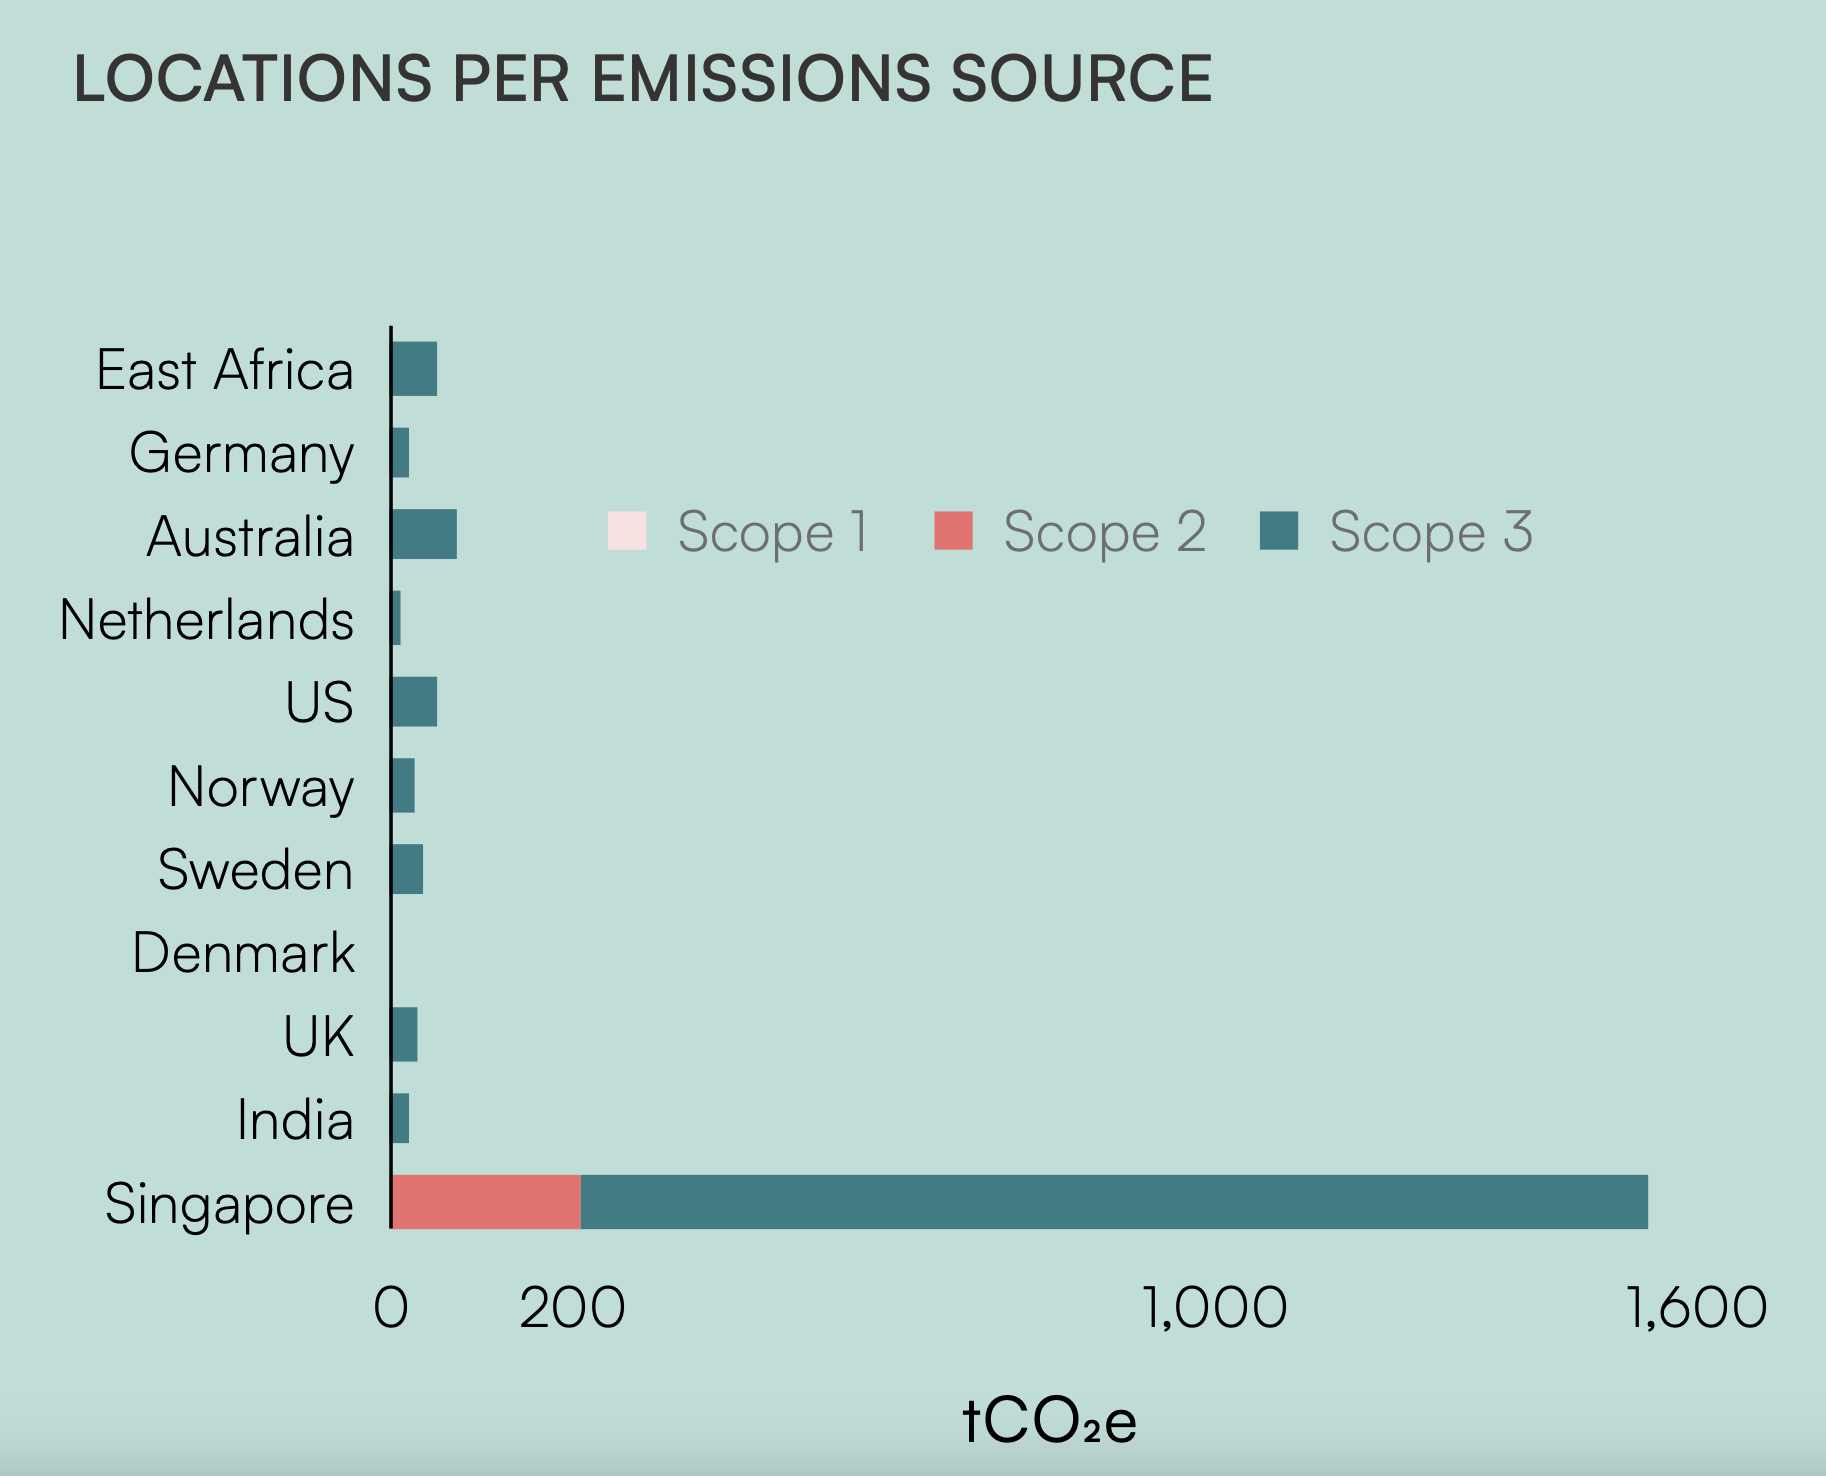 A graph showing locations per emissions source across scope 1, scope 2, scope 3 in 11 countries.